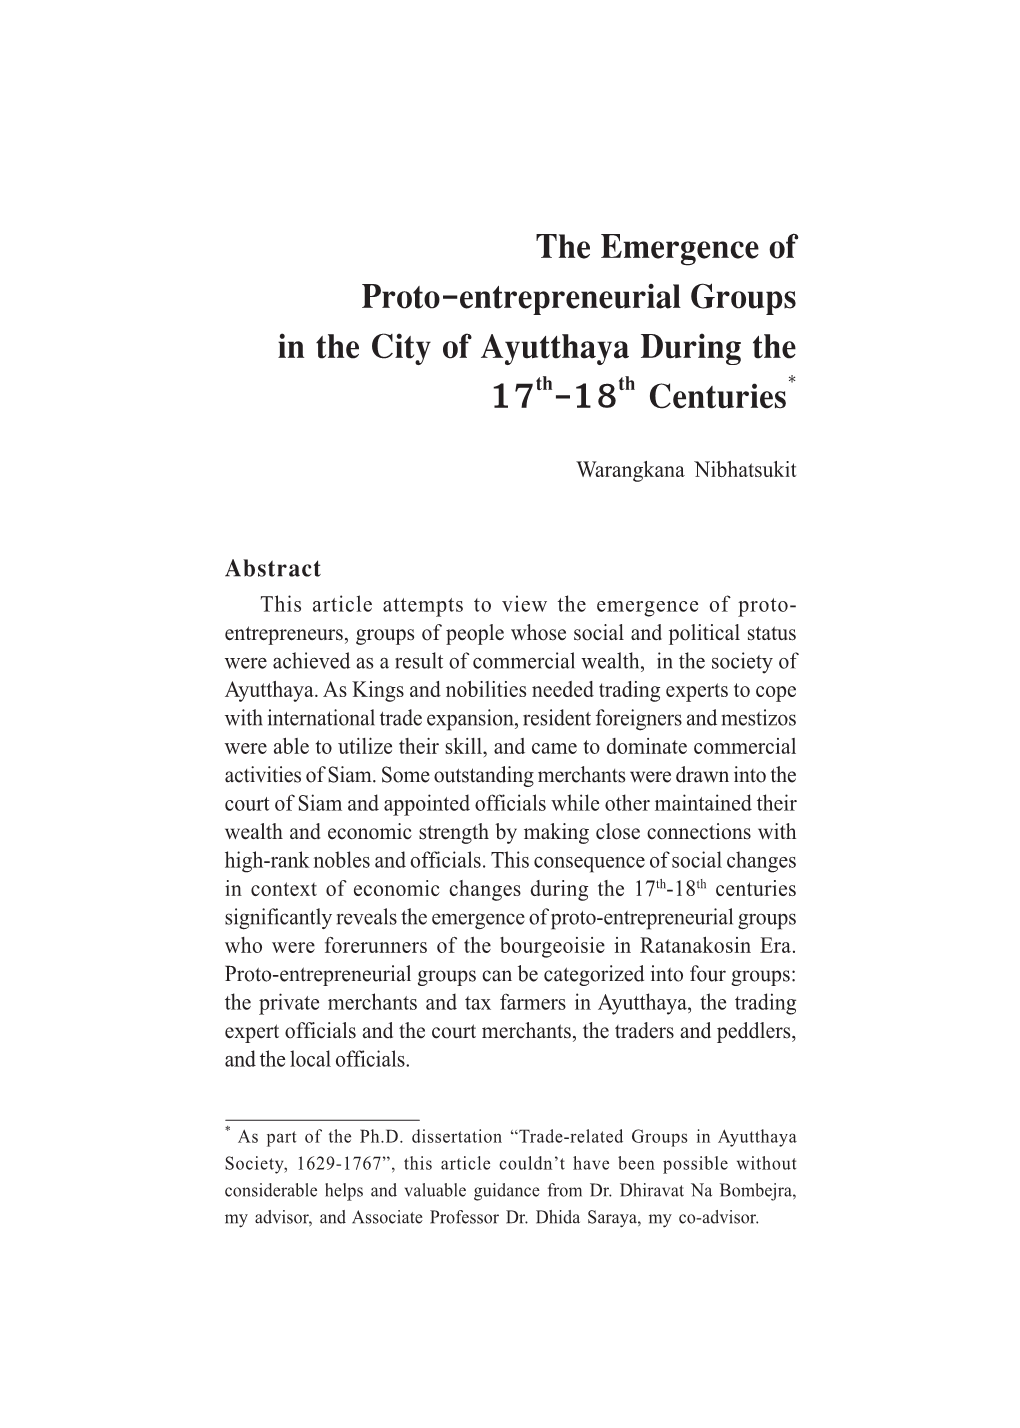 The Emergence of Proto-Entrepreneurial Groups in the City of Ayutthaya During the 17Th-18Th Centuries*